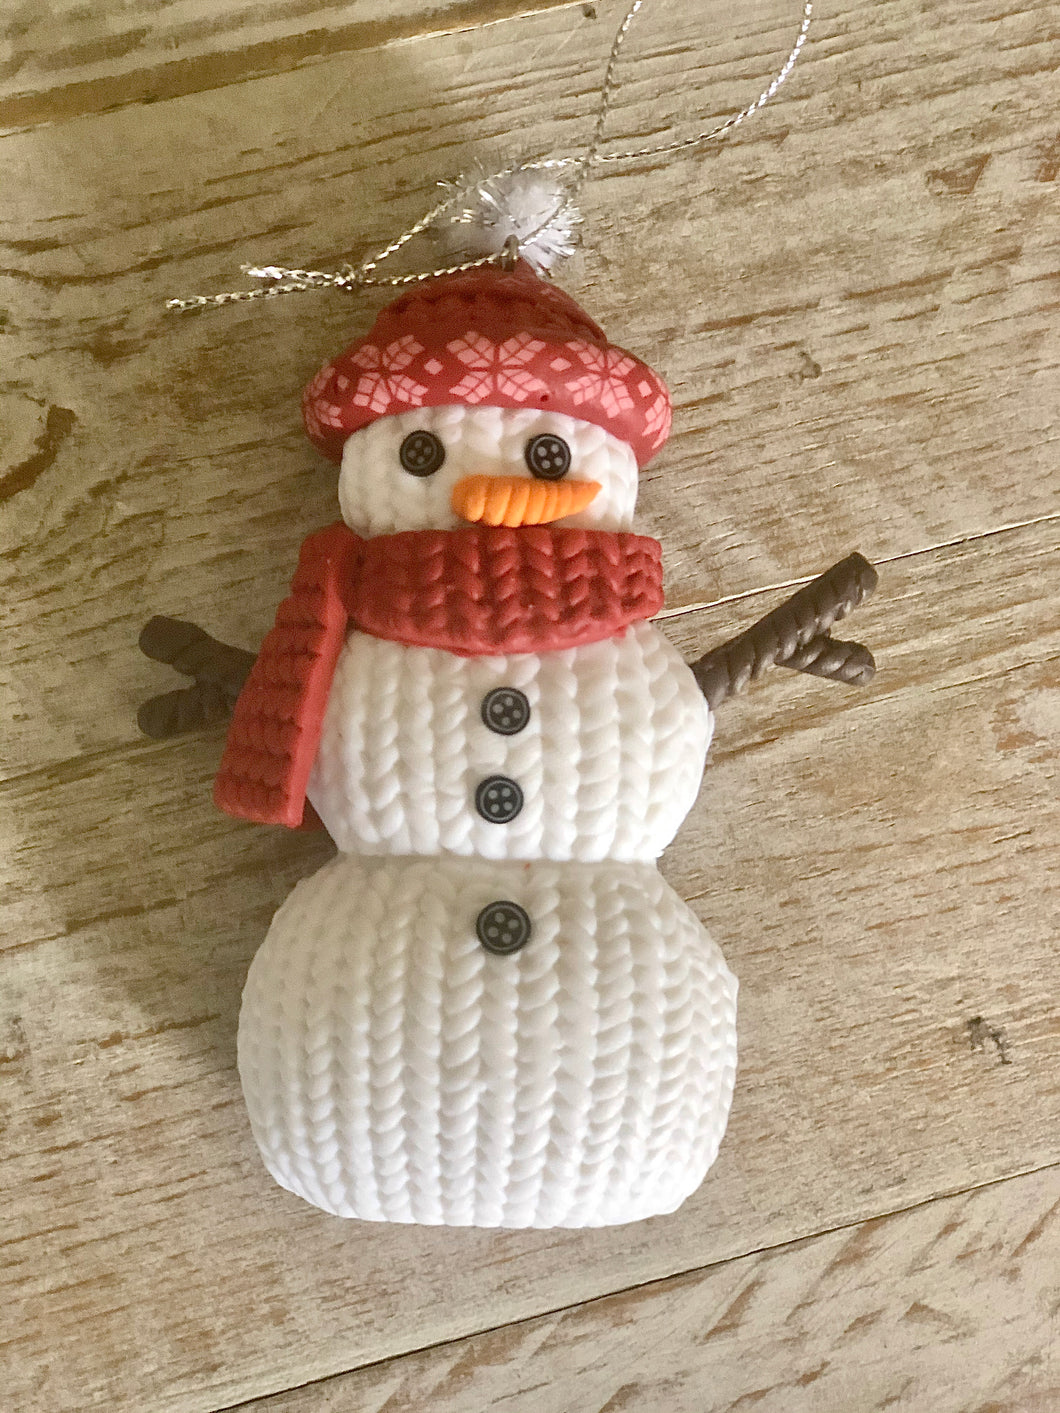 Cute Little Snowman With Carrot Nose and Button Eyes